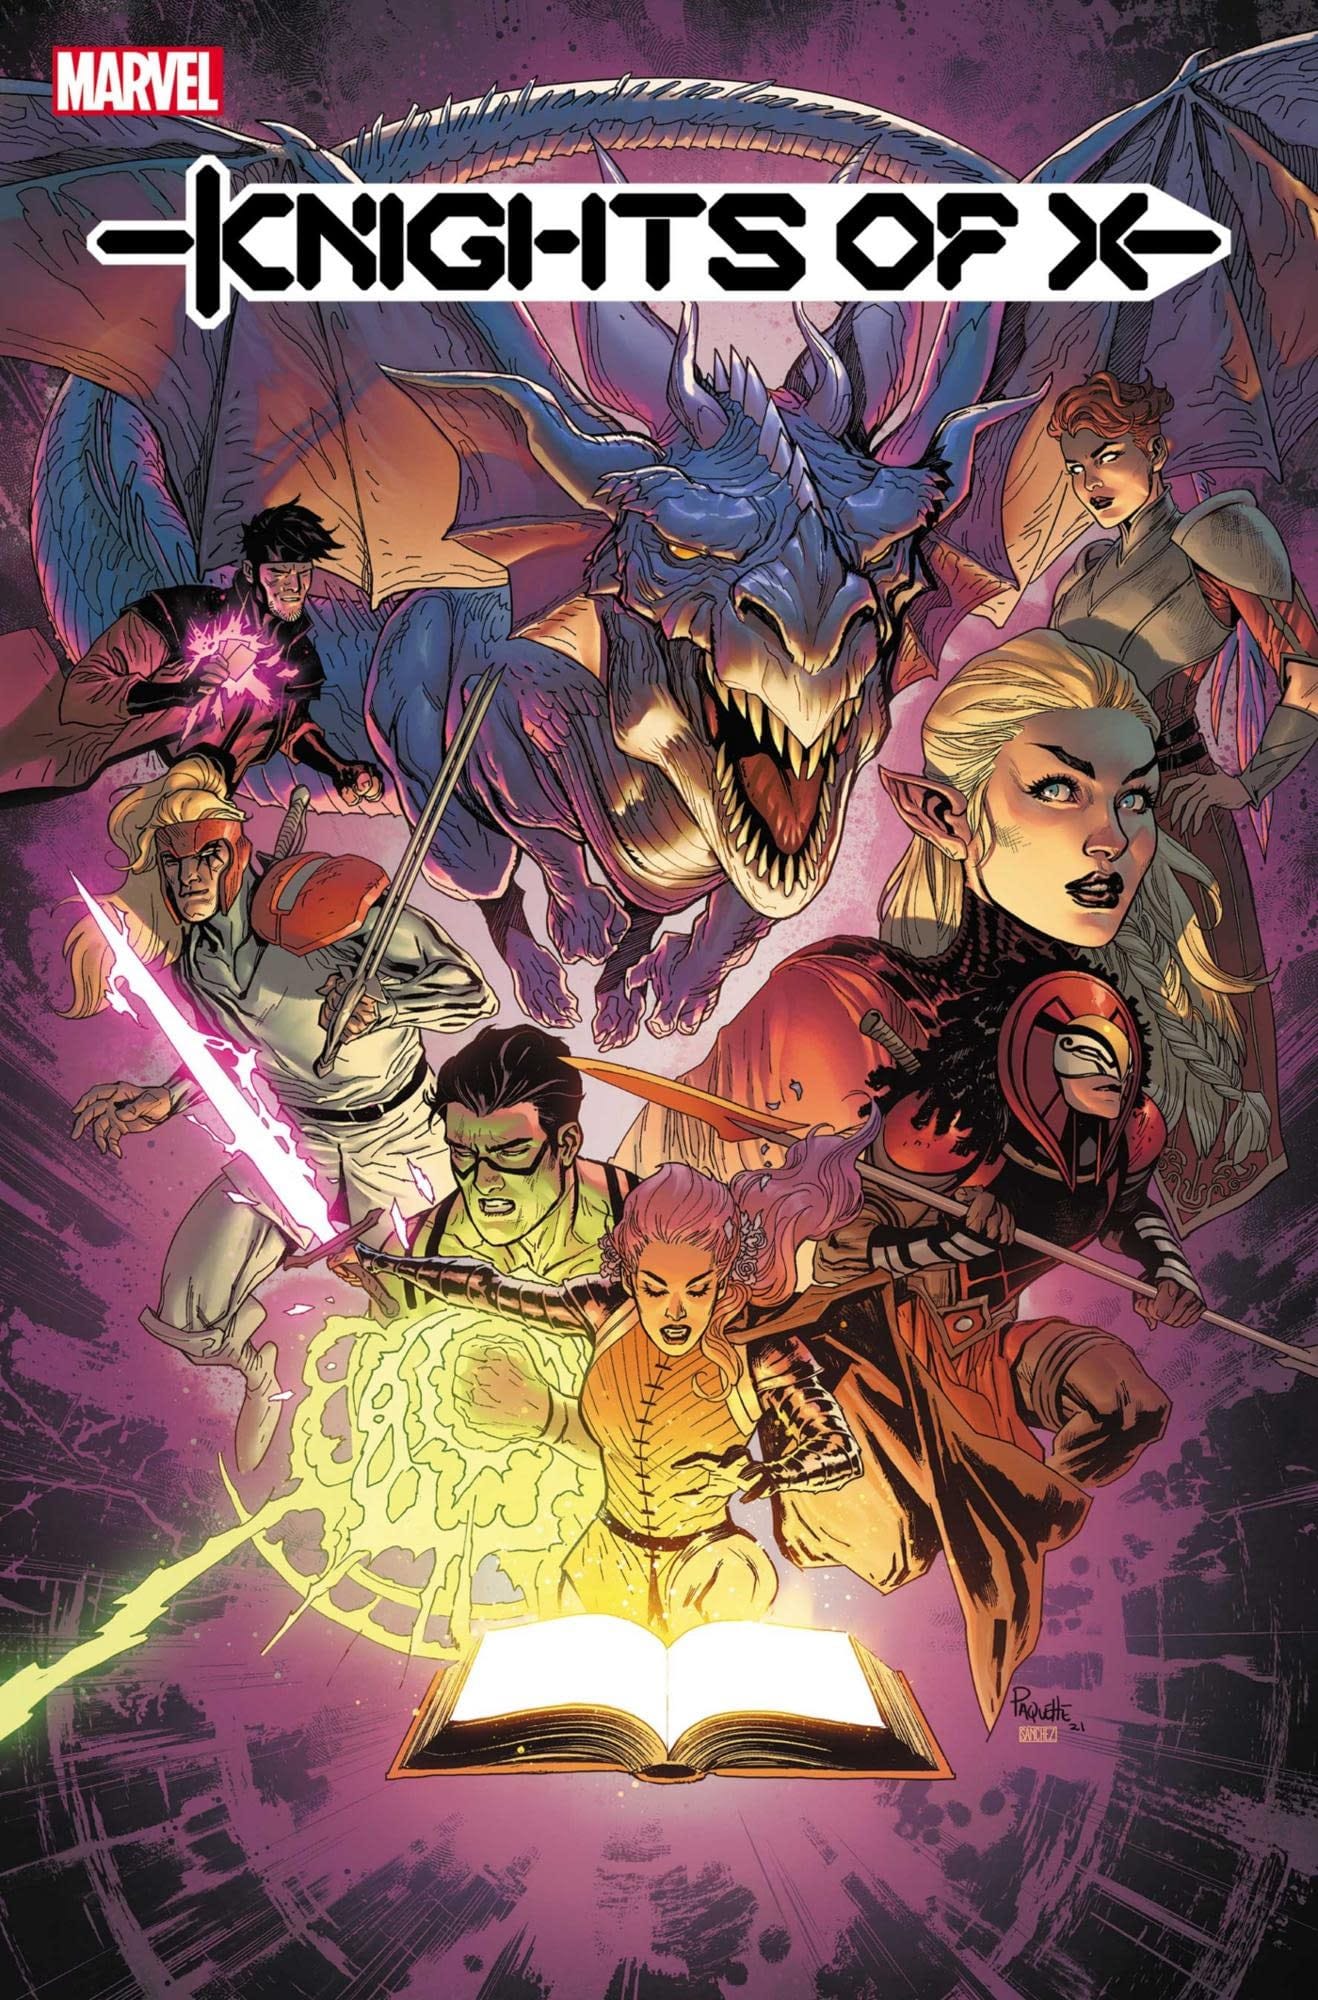 Knights of X #1 Preview: The Quest for a Sales Boost